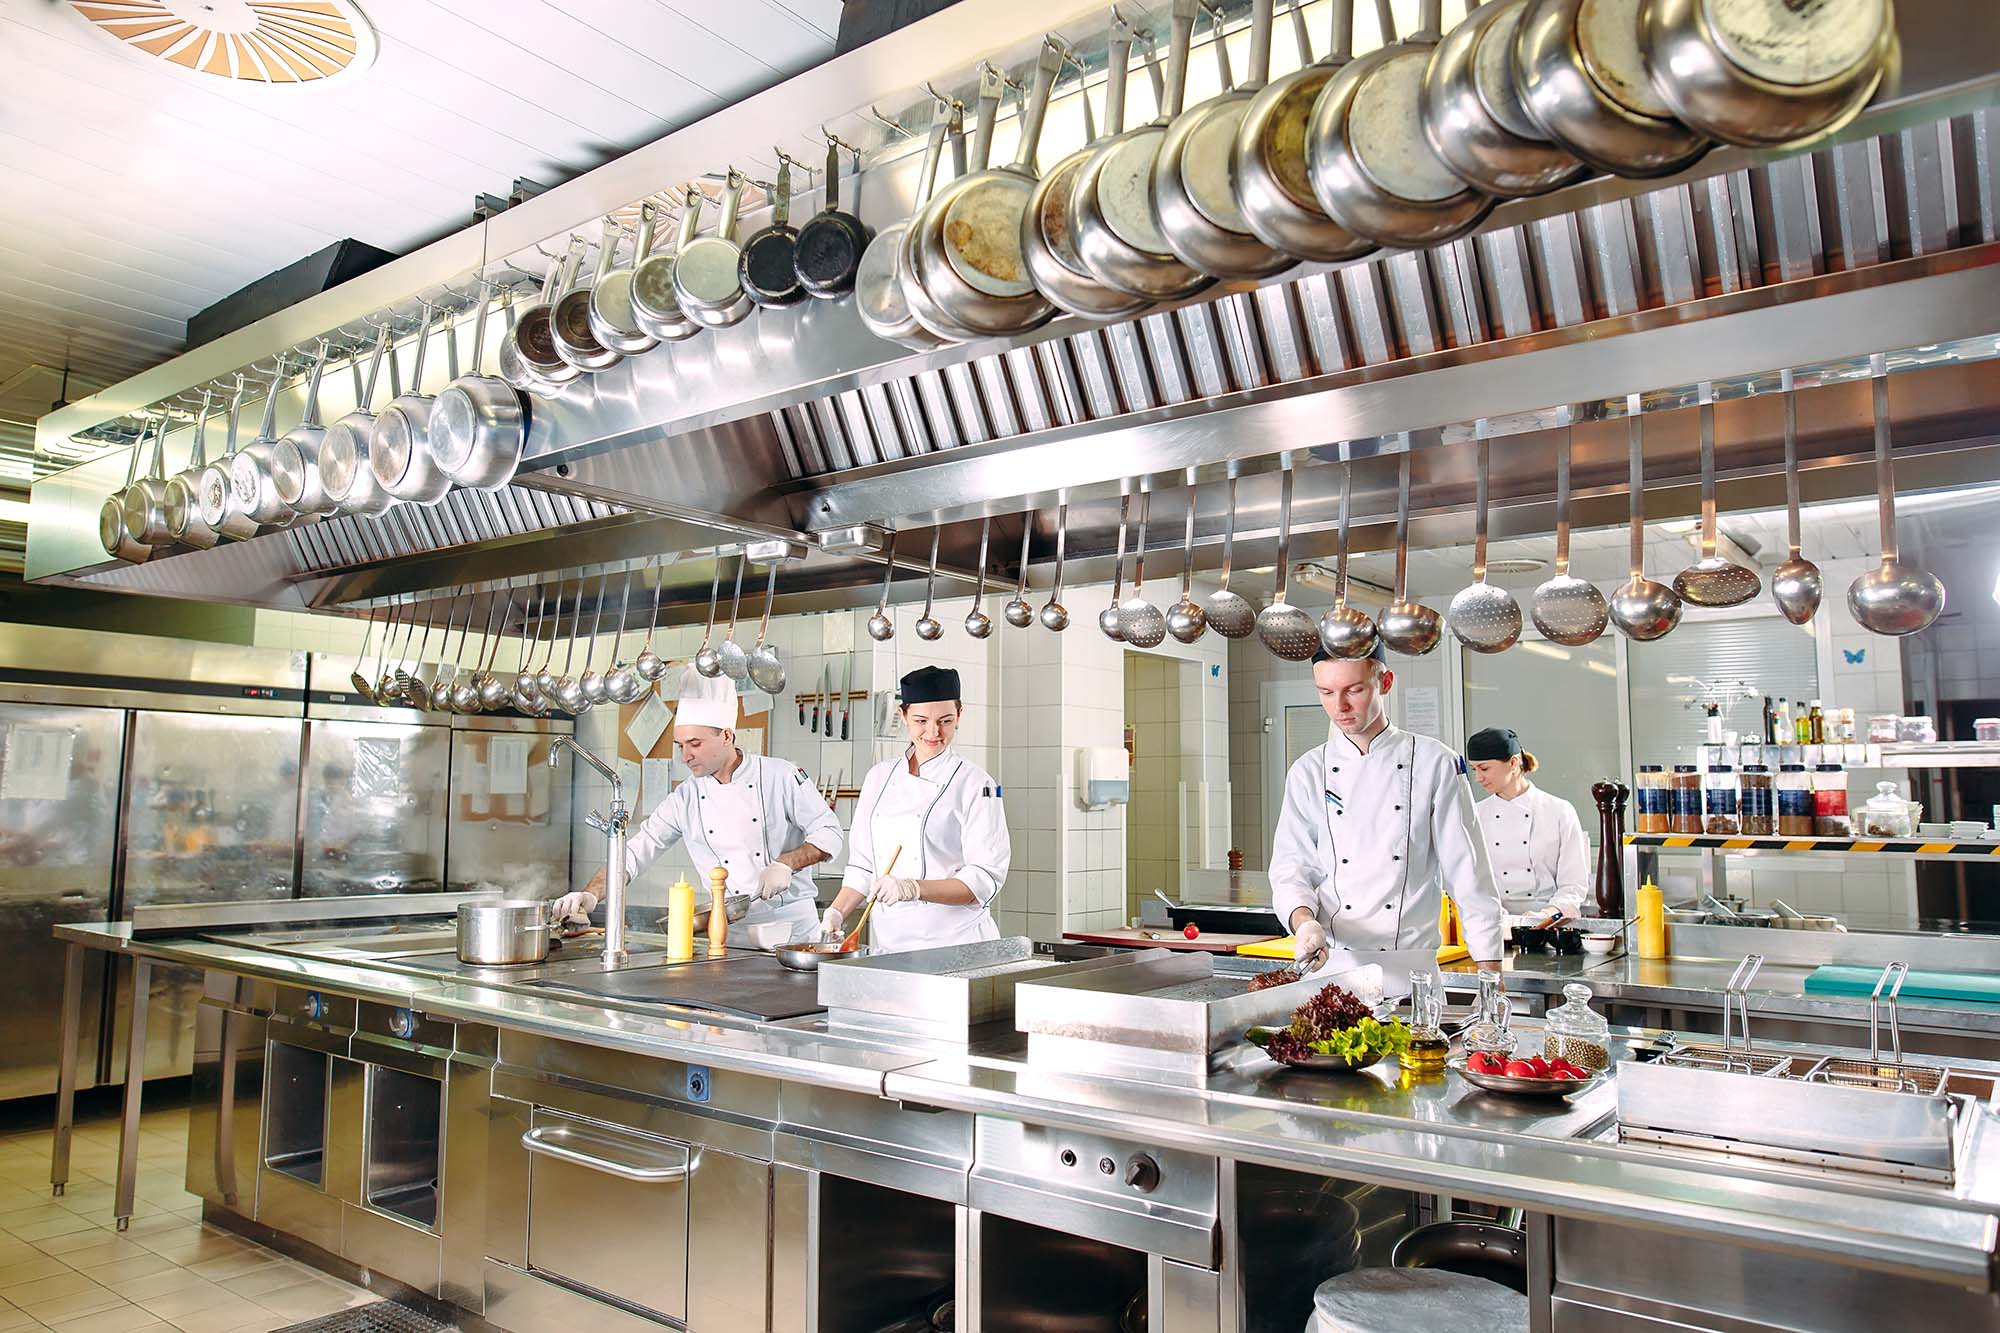 Commercial kitchen cookware chefs use hanging while they cook